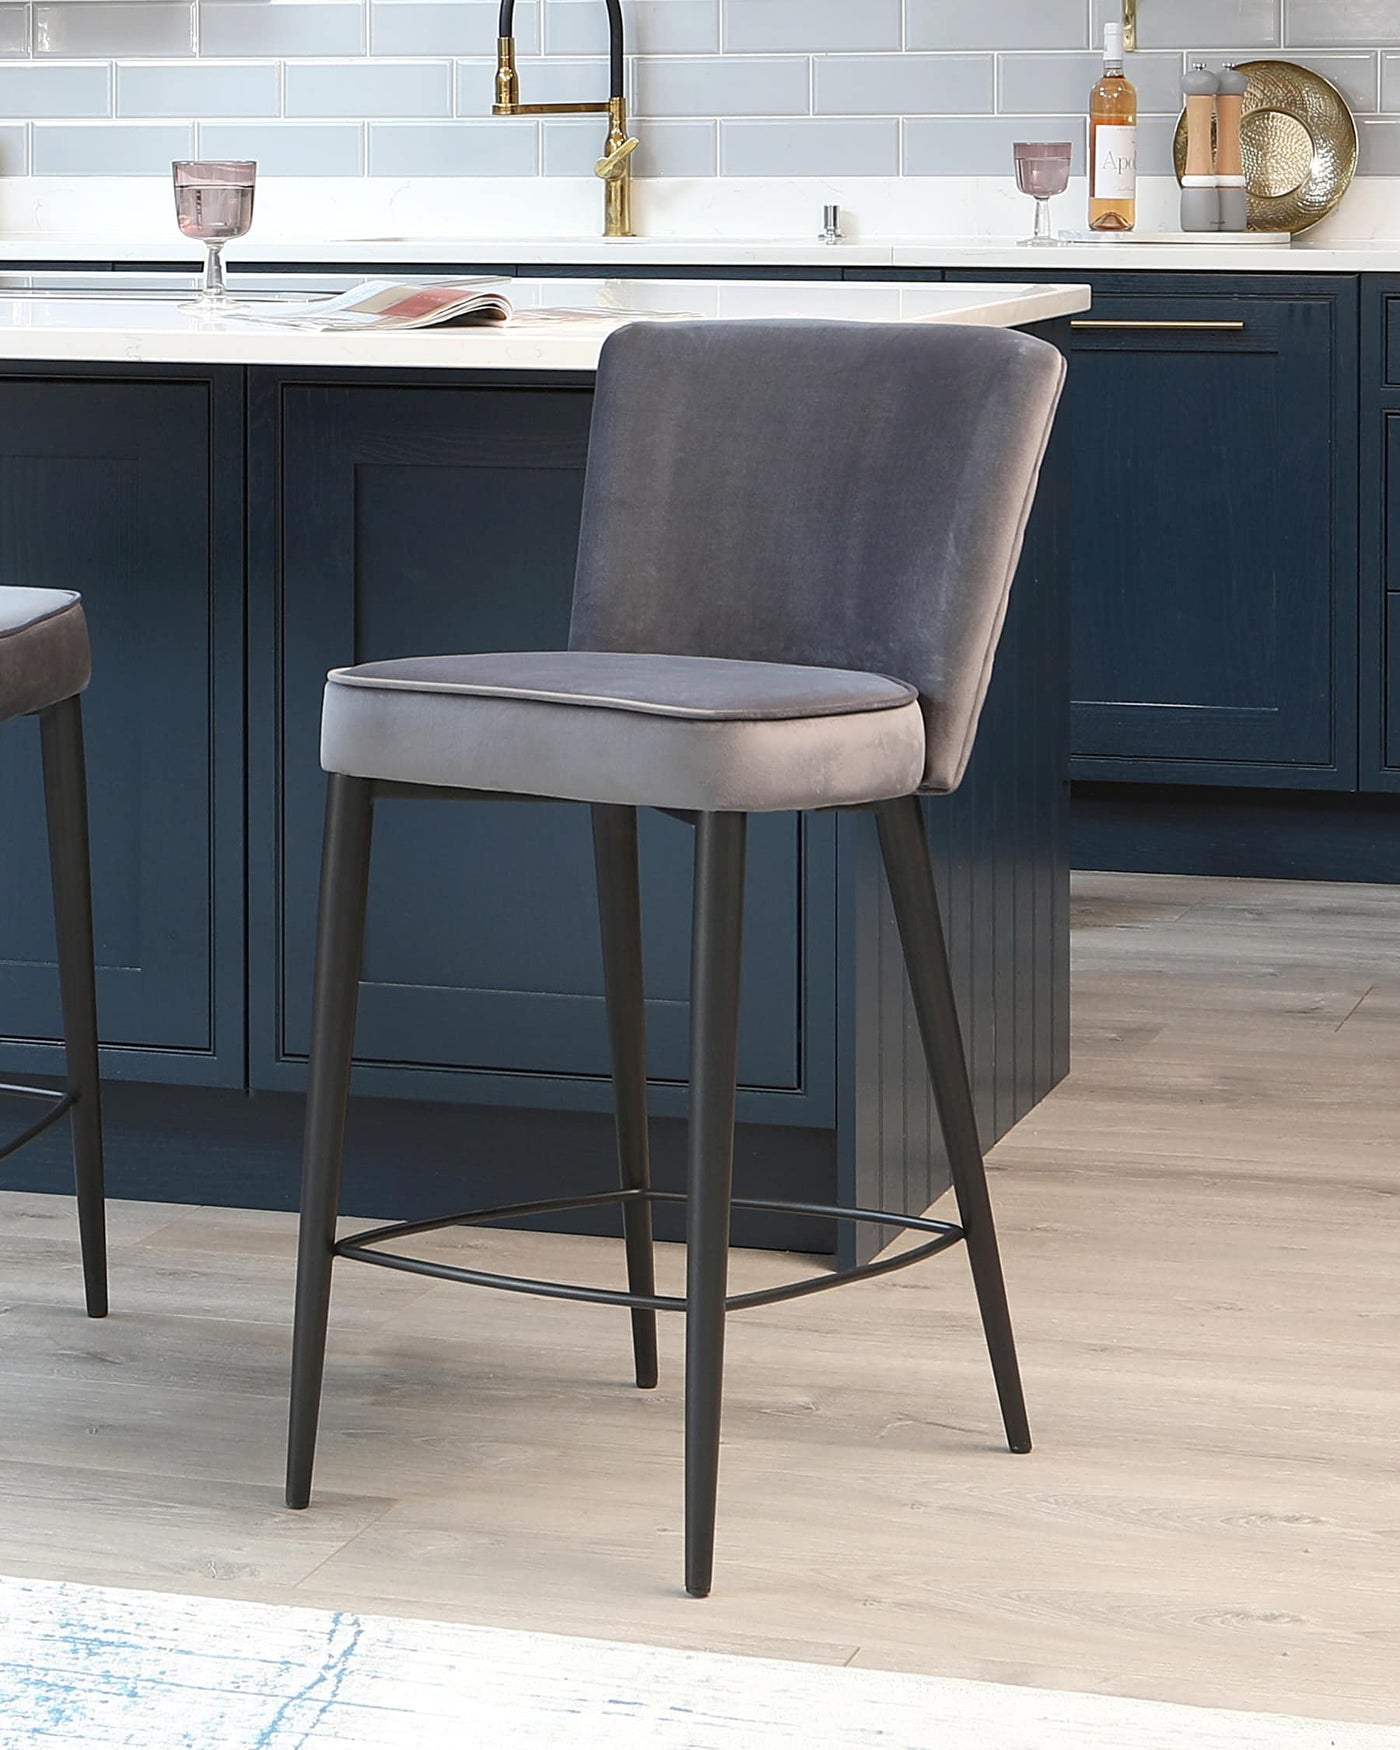 Elegant modern bar stool with a matte grey upholstered seat and backrest mounted on a slender black metal frame with four legs and a practical footrest.